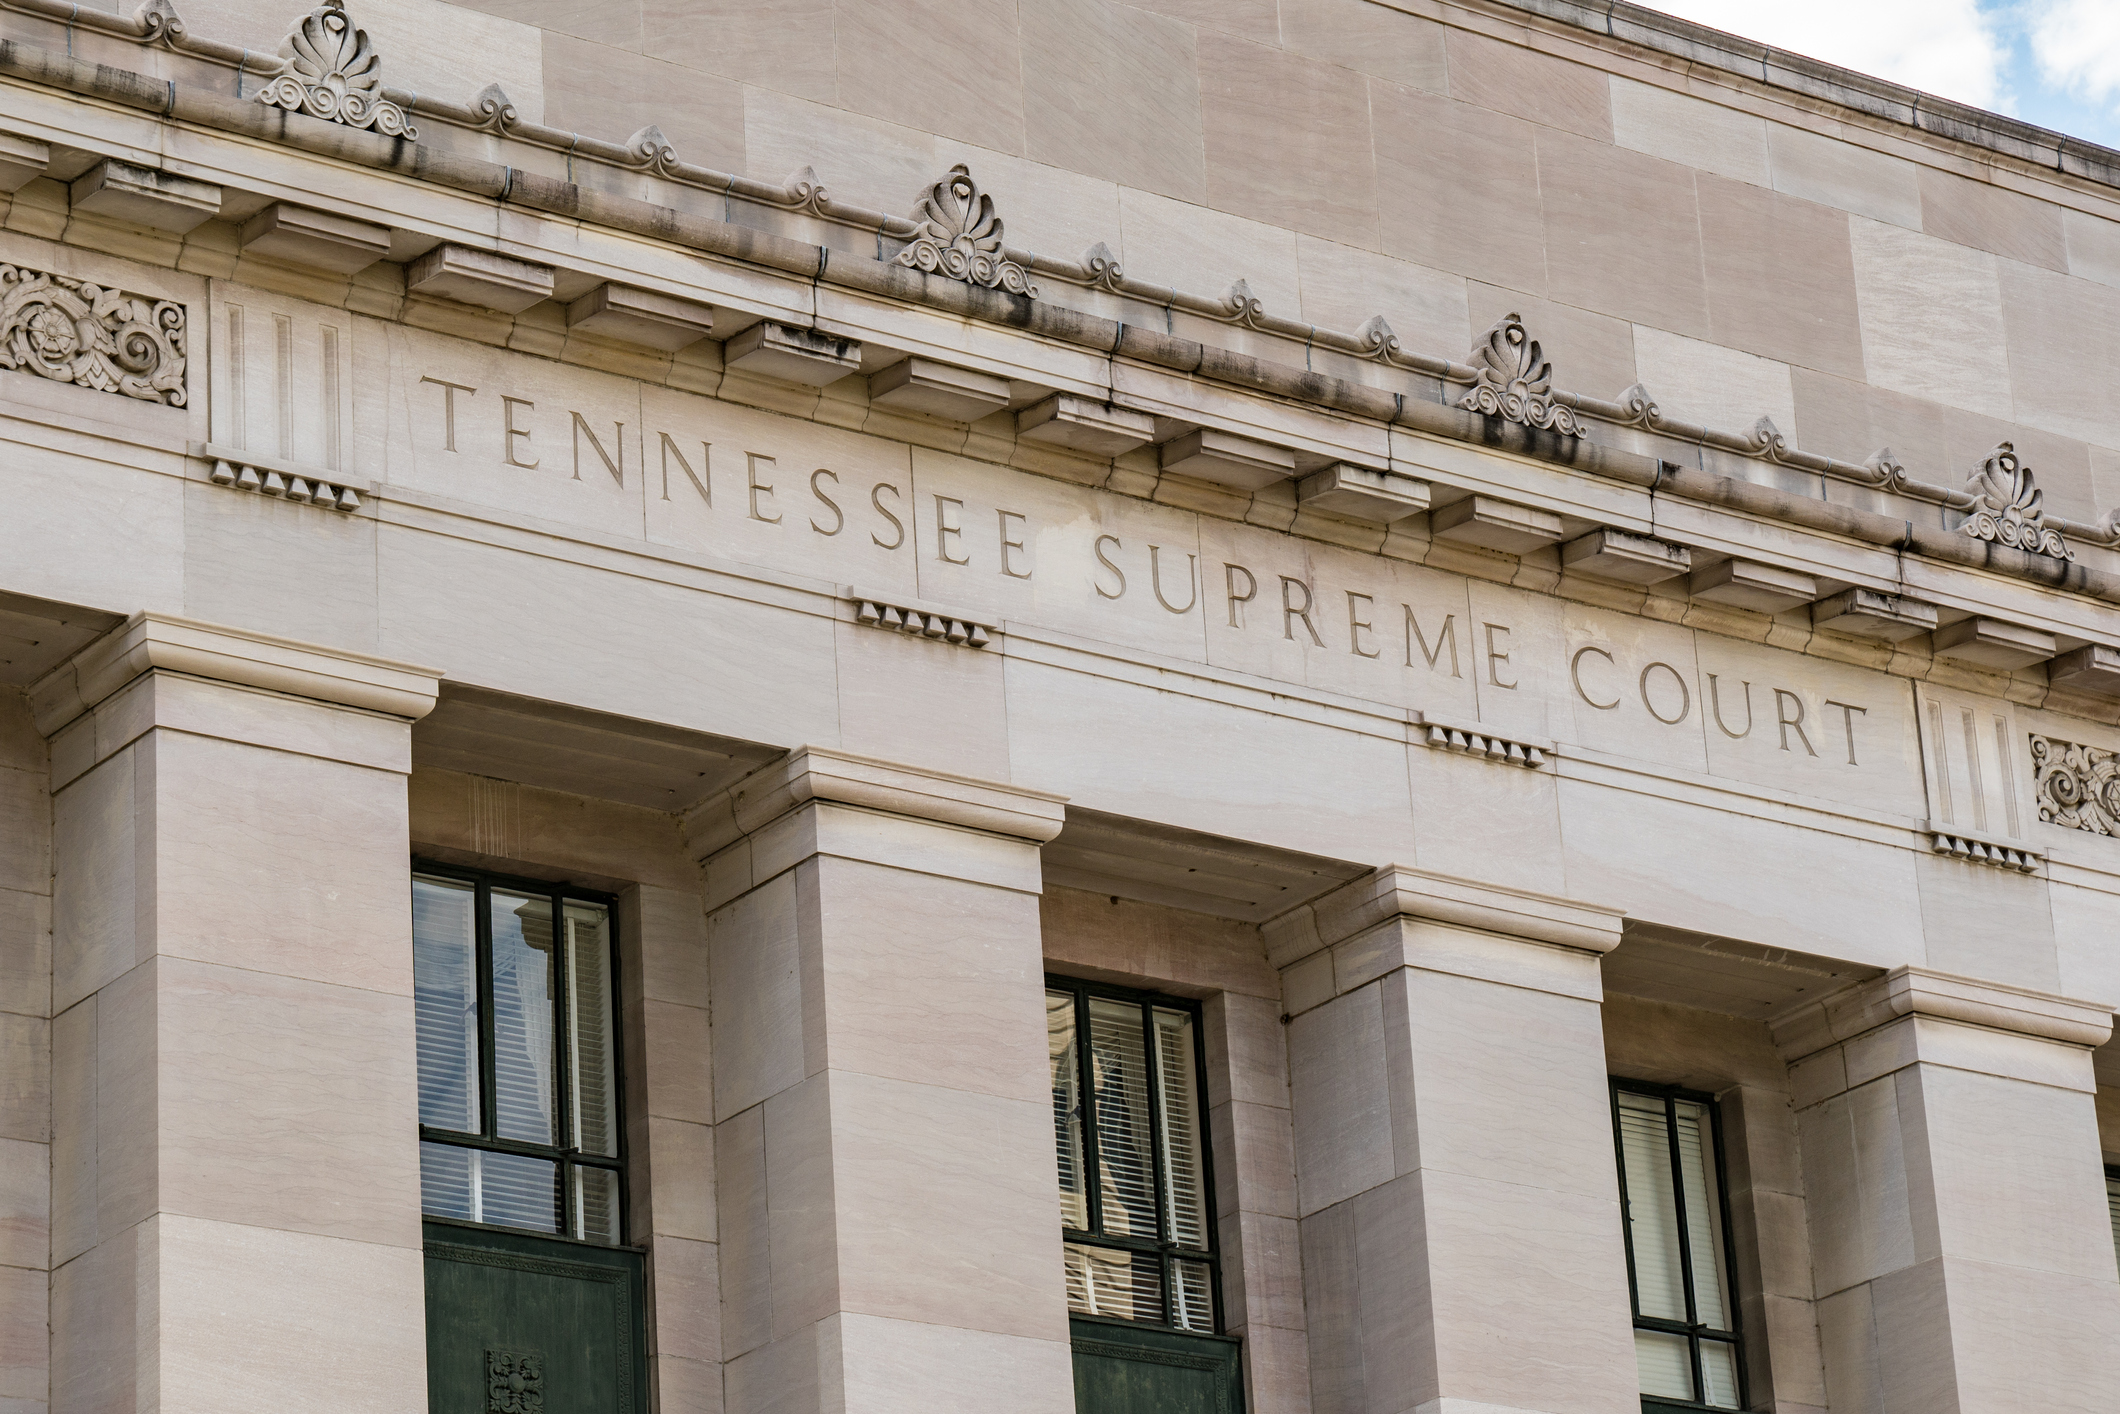 Nashville, Tennessee - October 9, 2017: Exterior of the Tennessee State Supreme Court building in Nashville